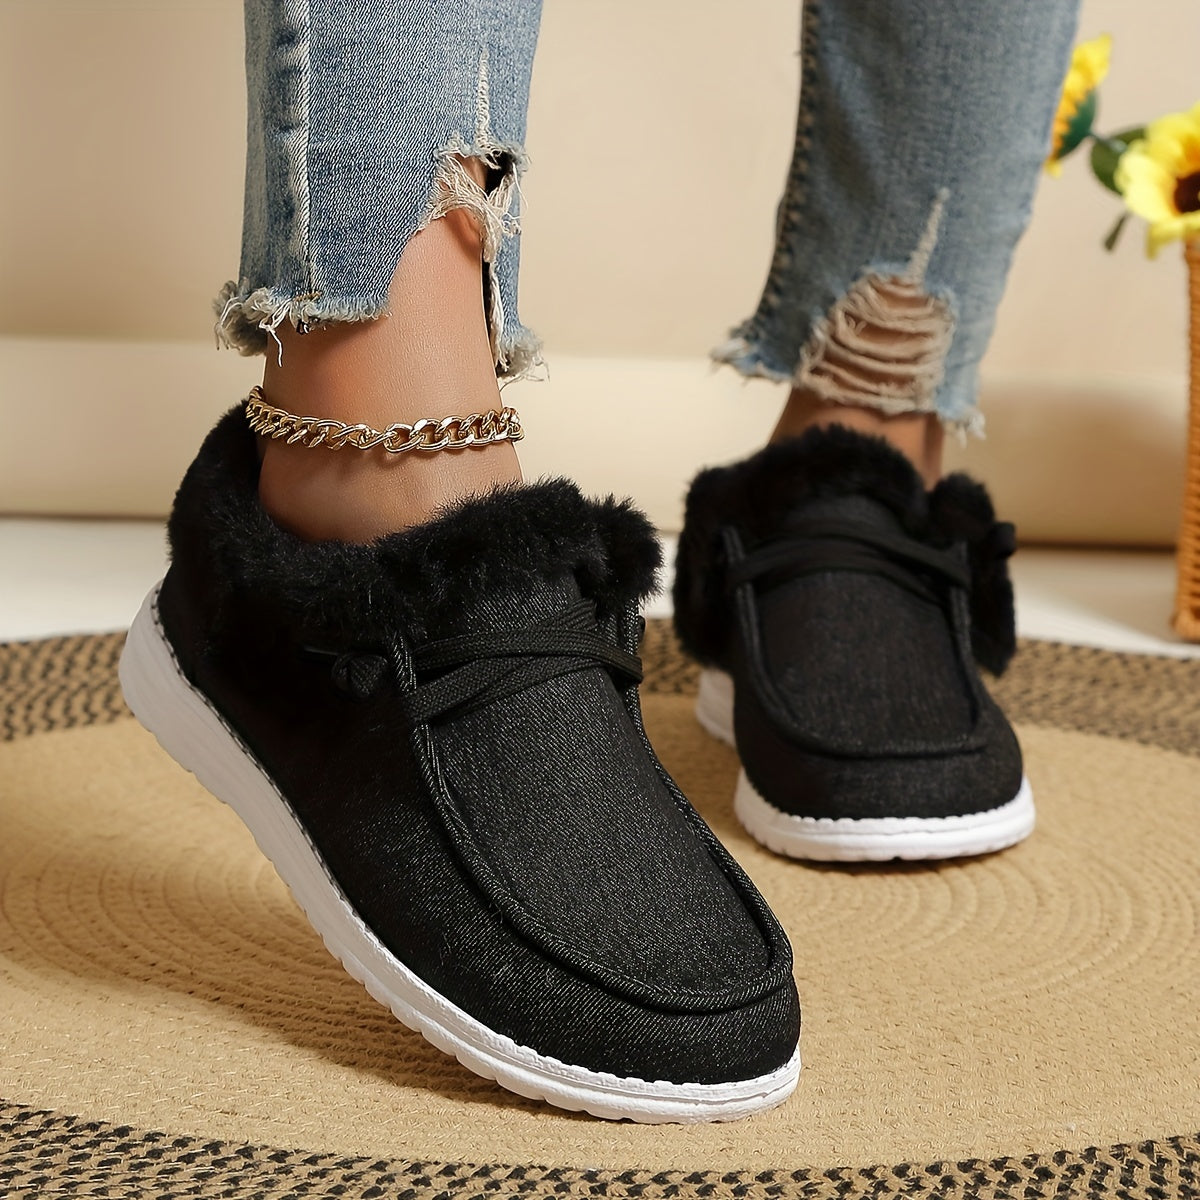 Women's Simple Canvas Shoes, Casual Lace Up Plush Lined Shoes, Lightweight Low Top Sneakers